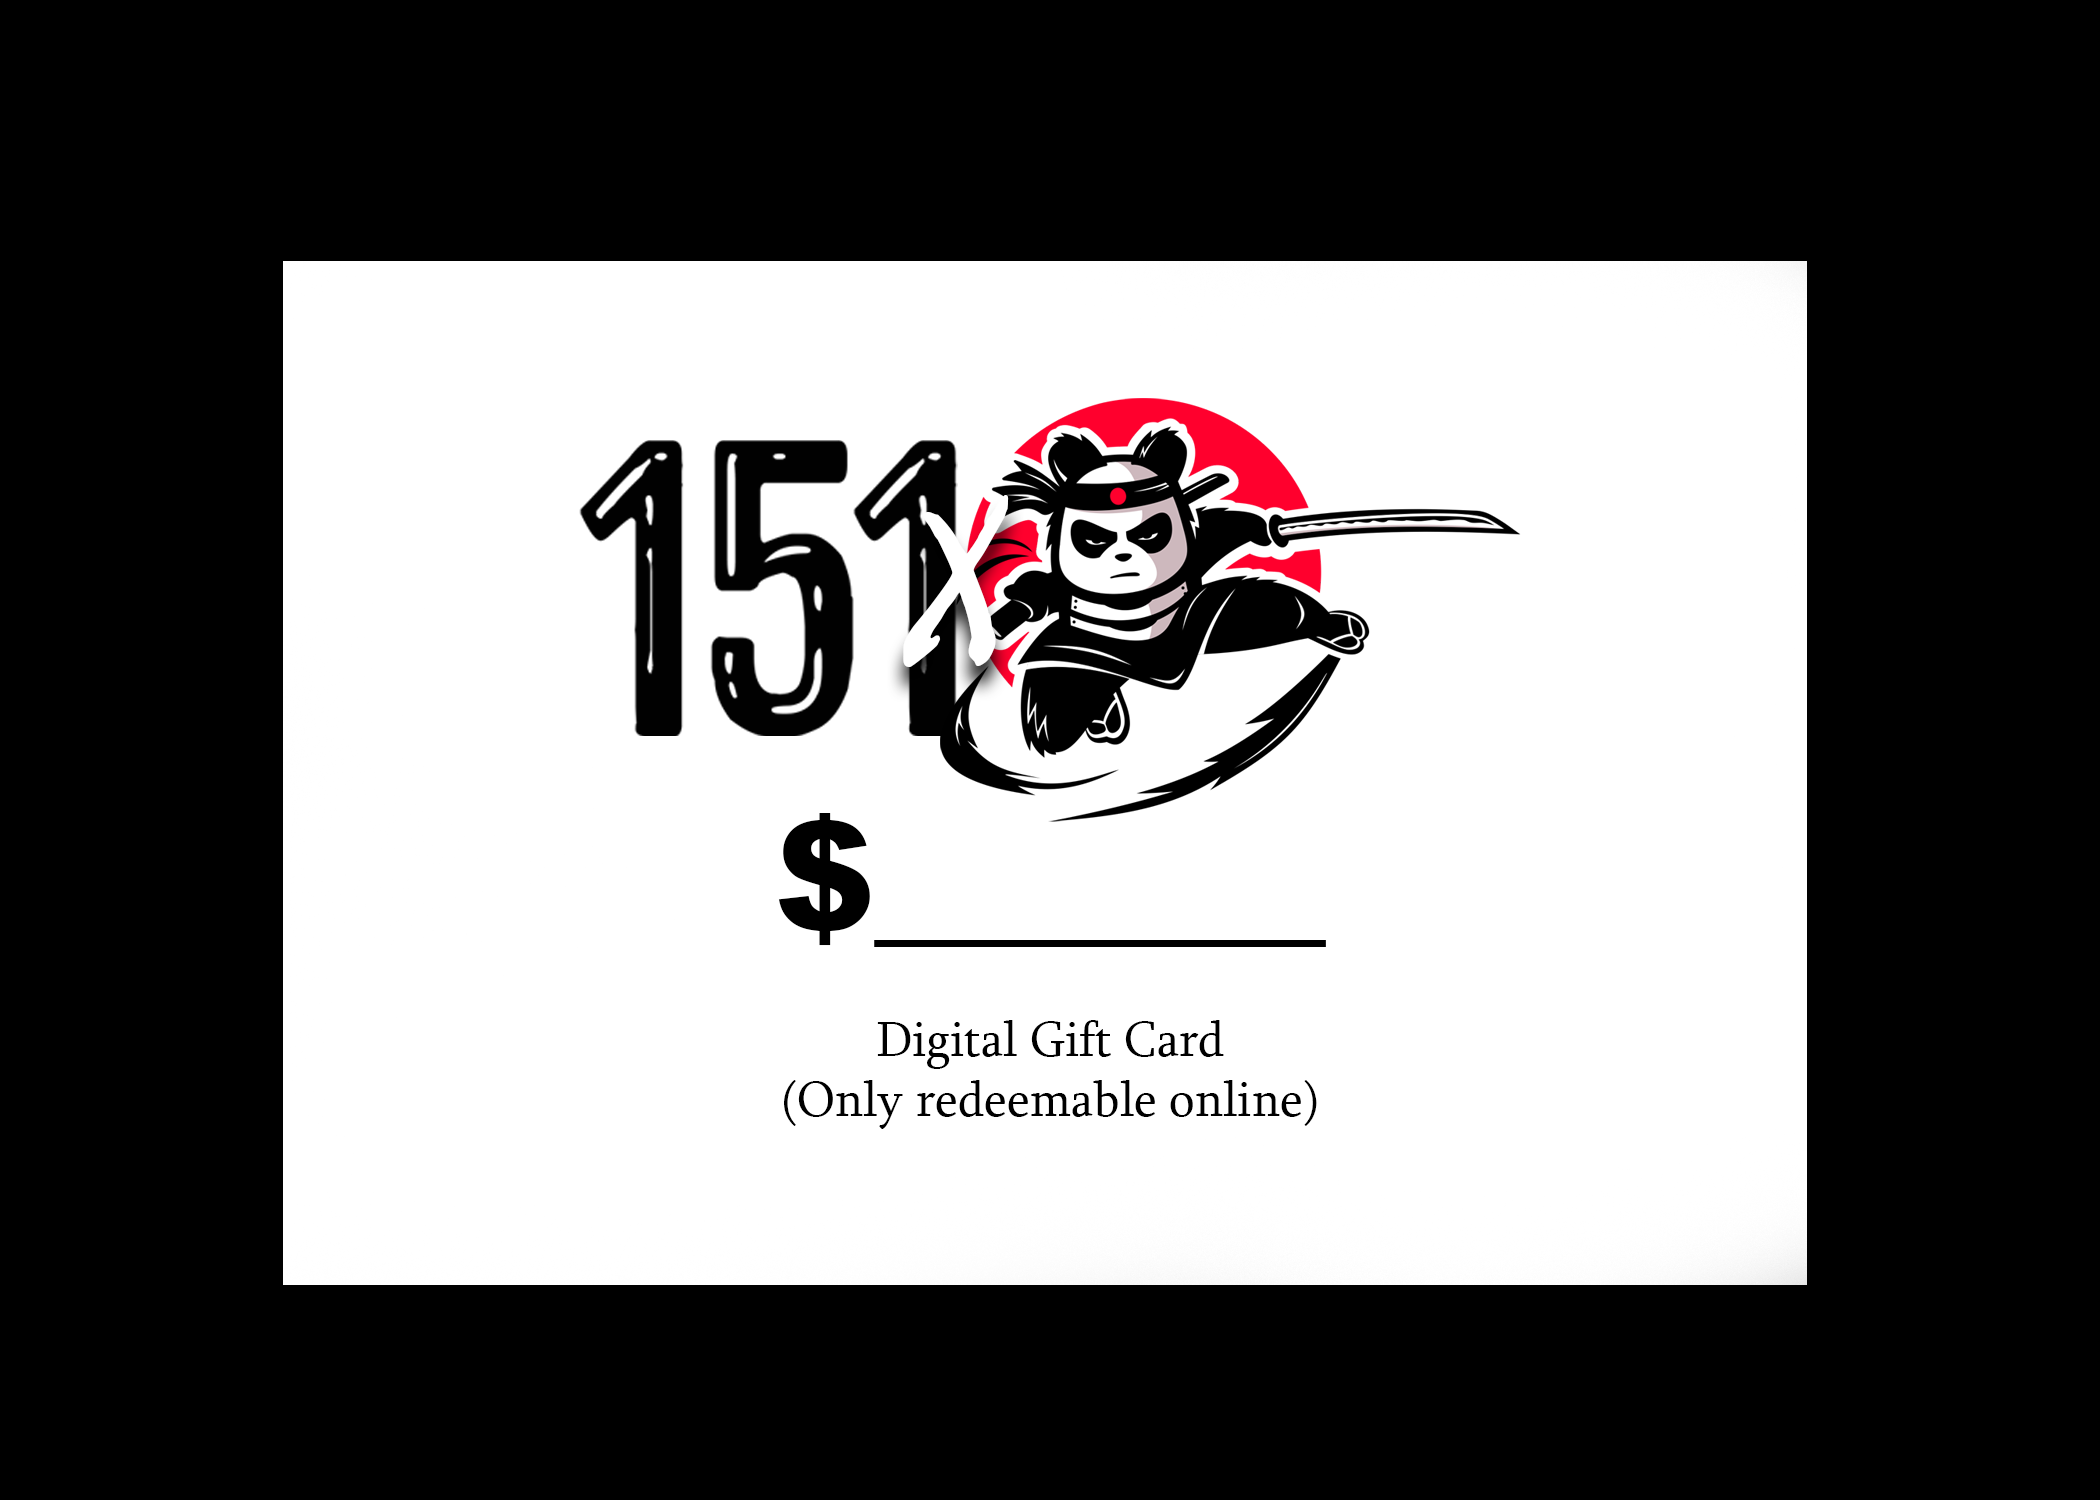 The Team Shop Online Gift Card